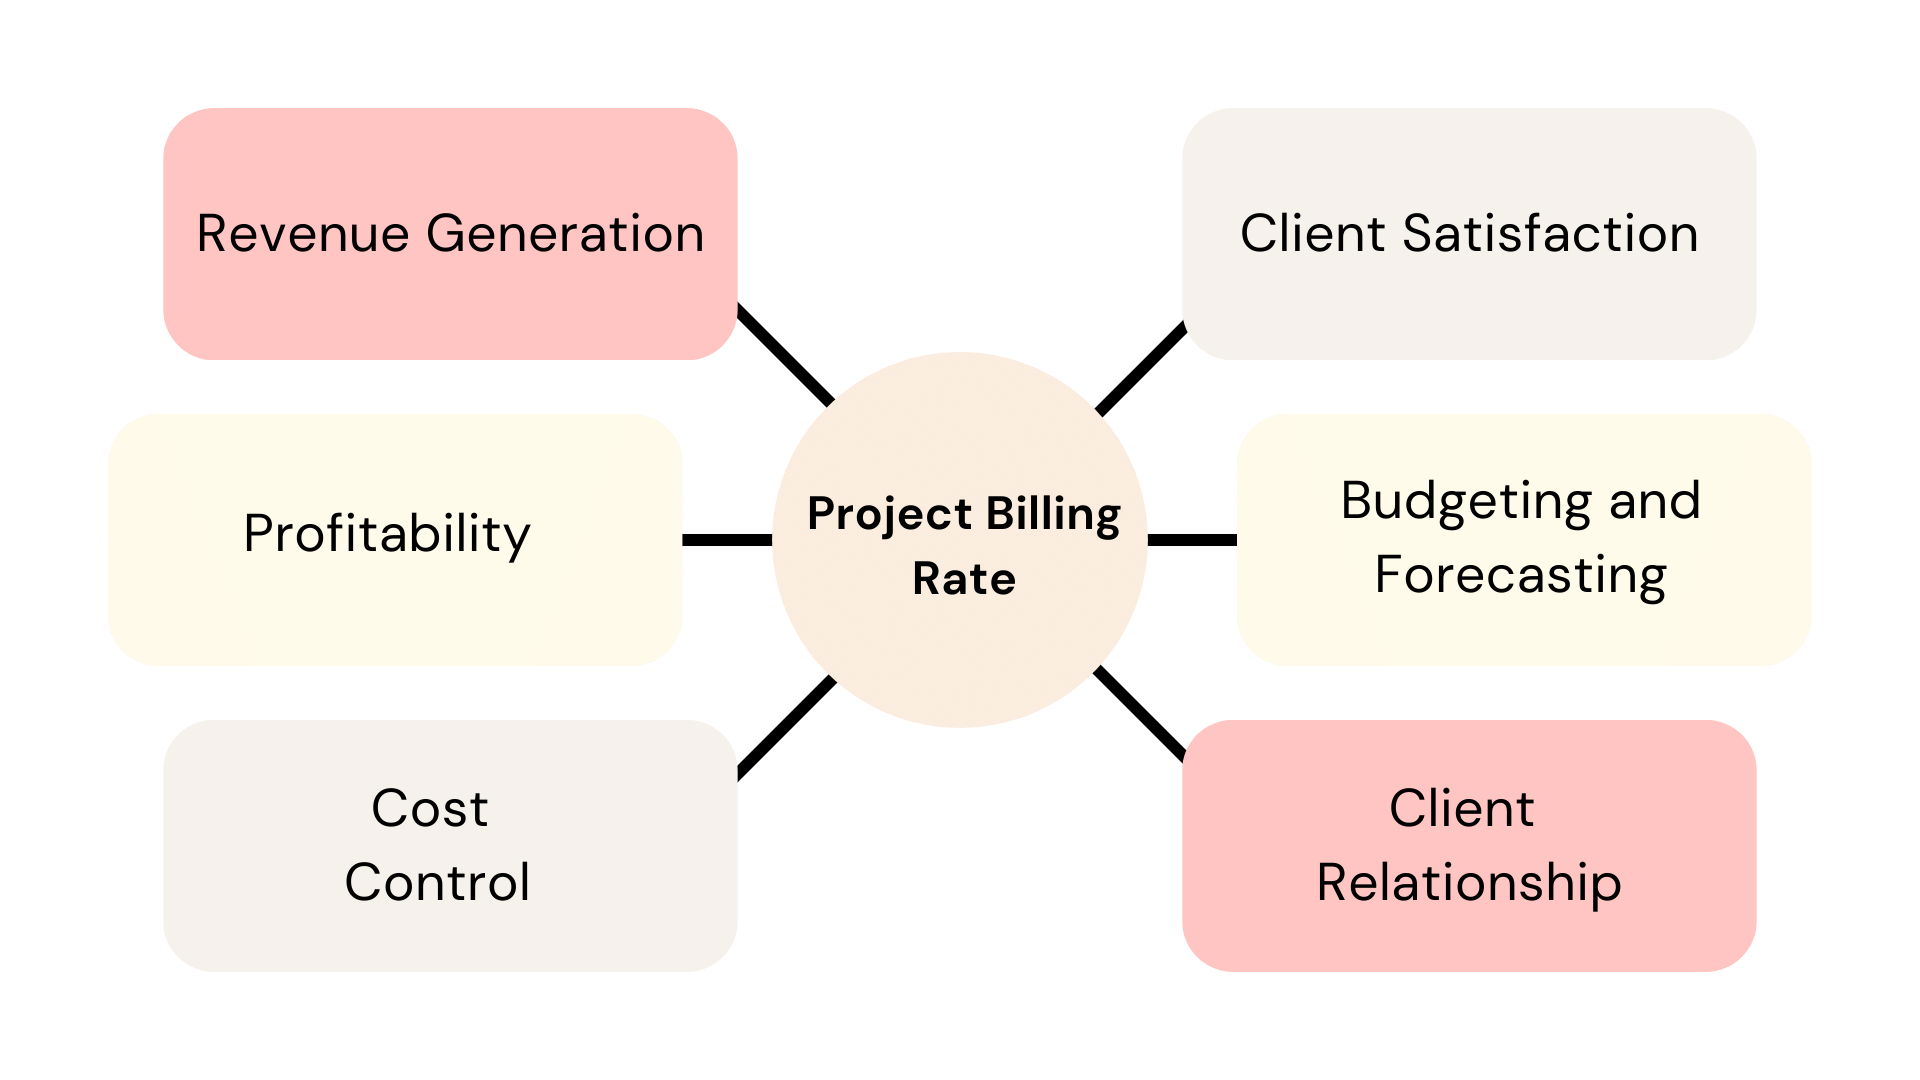 Project Billing Rate